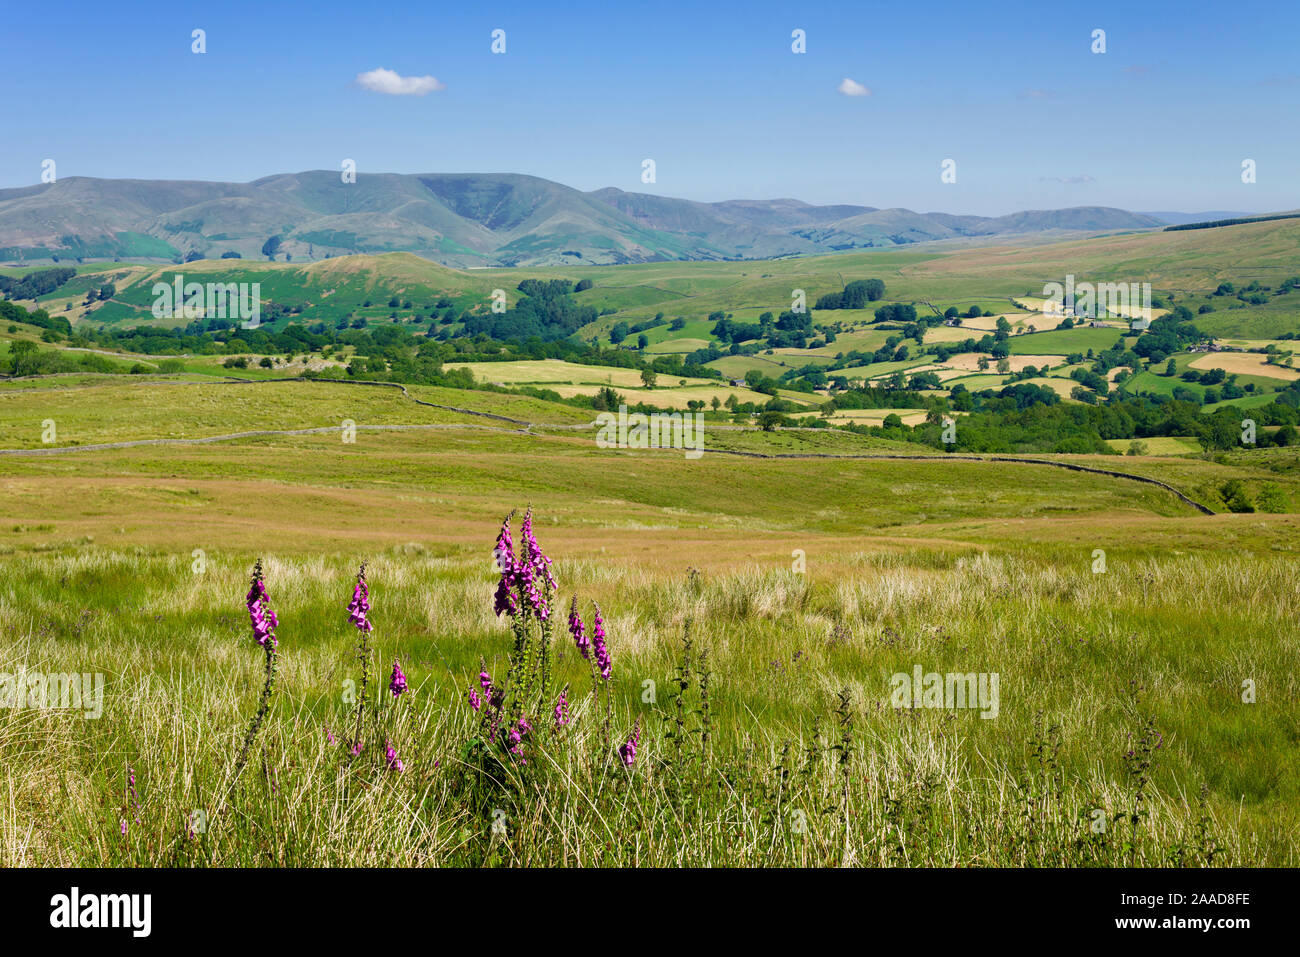 The view over Dentdale from Occupation Road in the Yorkshire Dales National Park with Howgill Fells beyond, Cumbria, England. Stock Photo